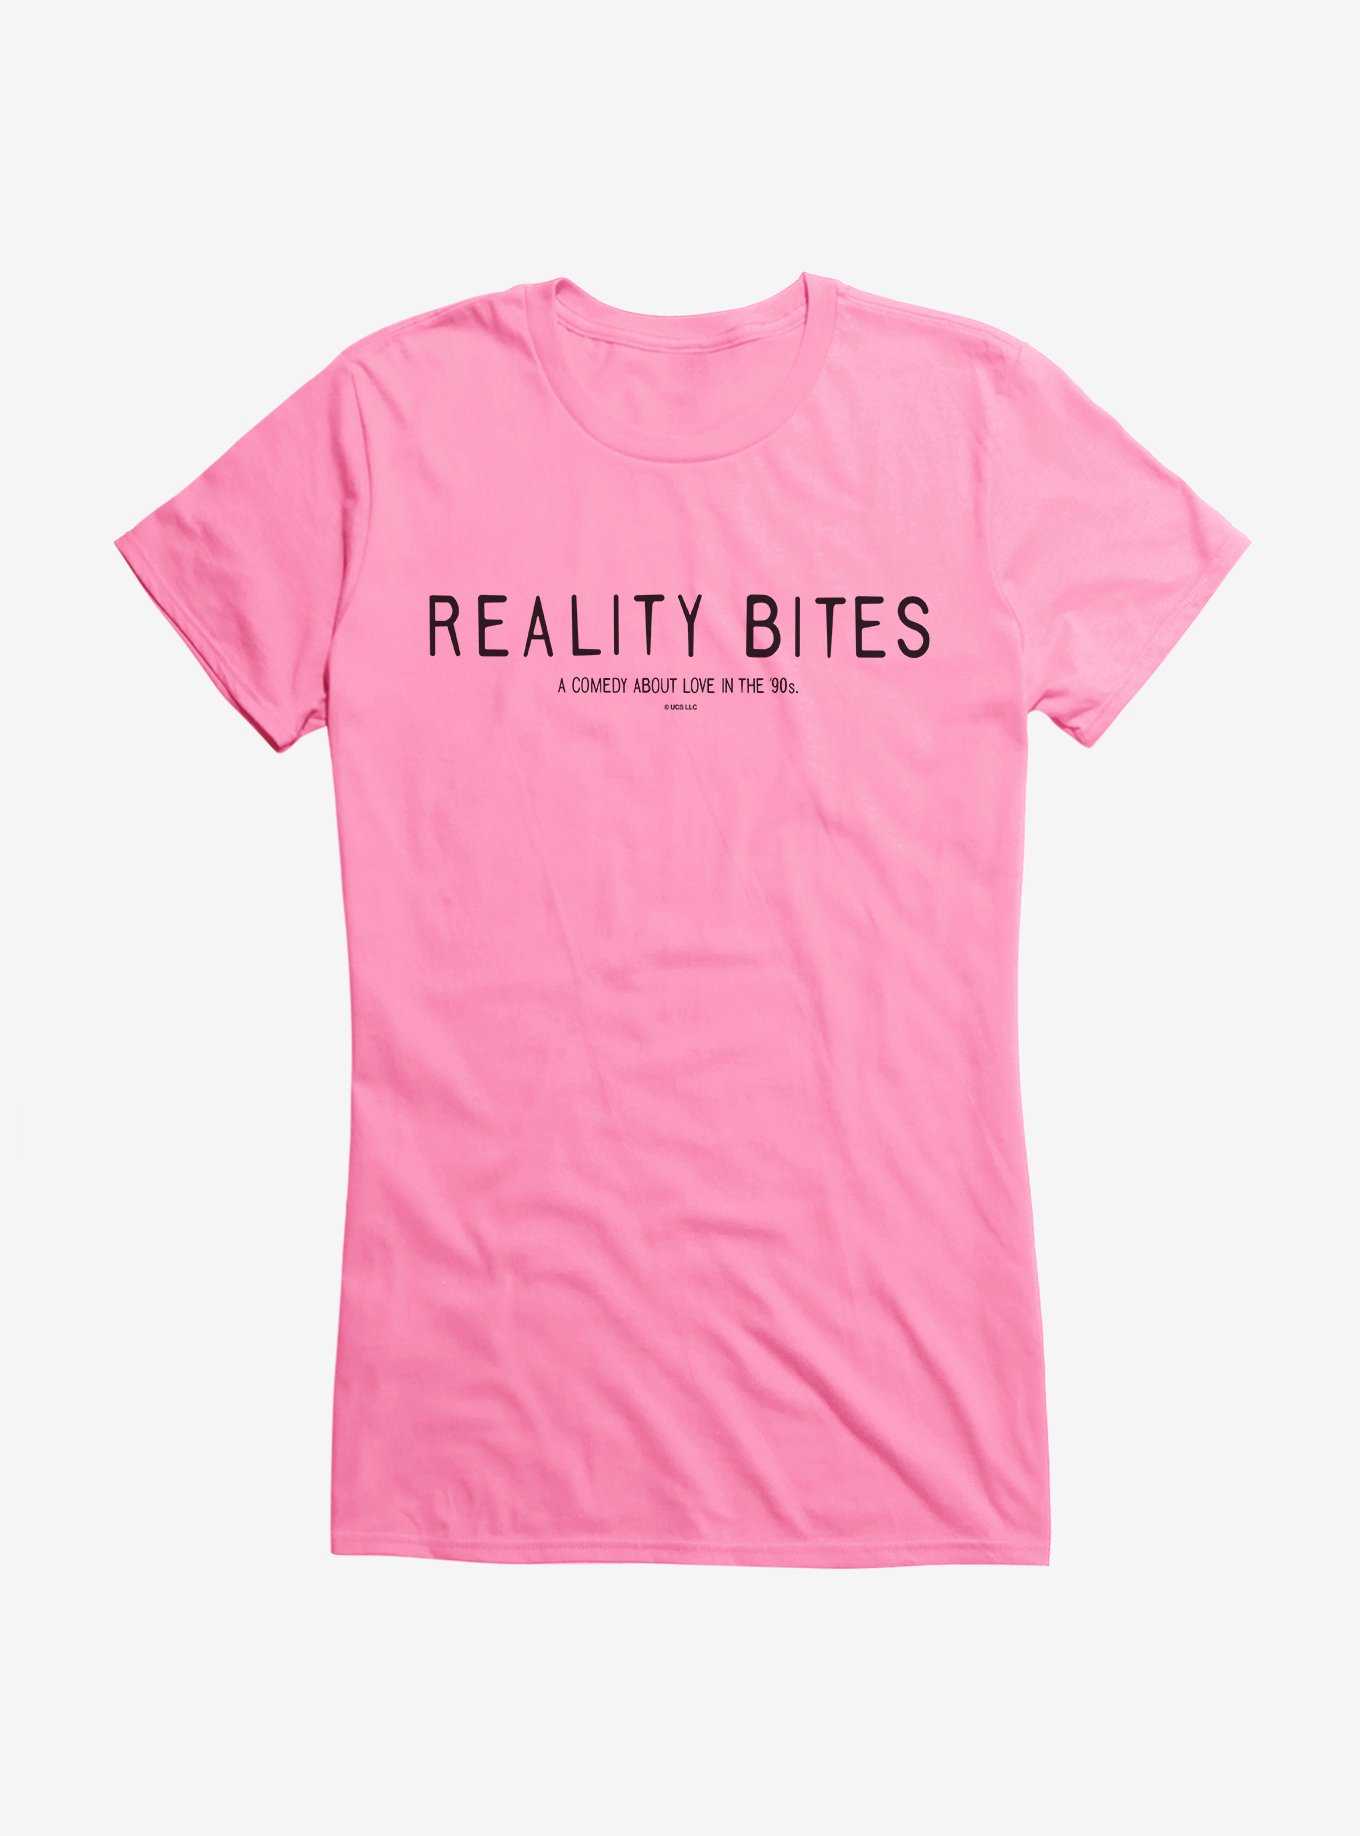 Reality Bites Comedy About Love Girls T-Shirt, , hi-res